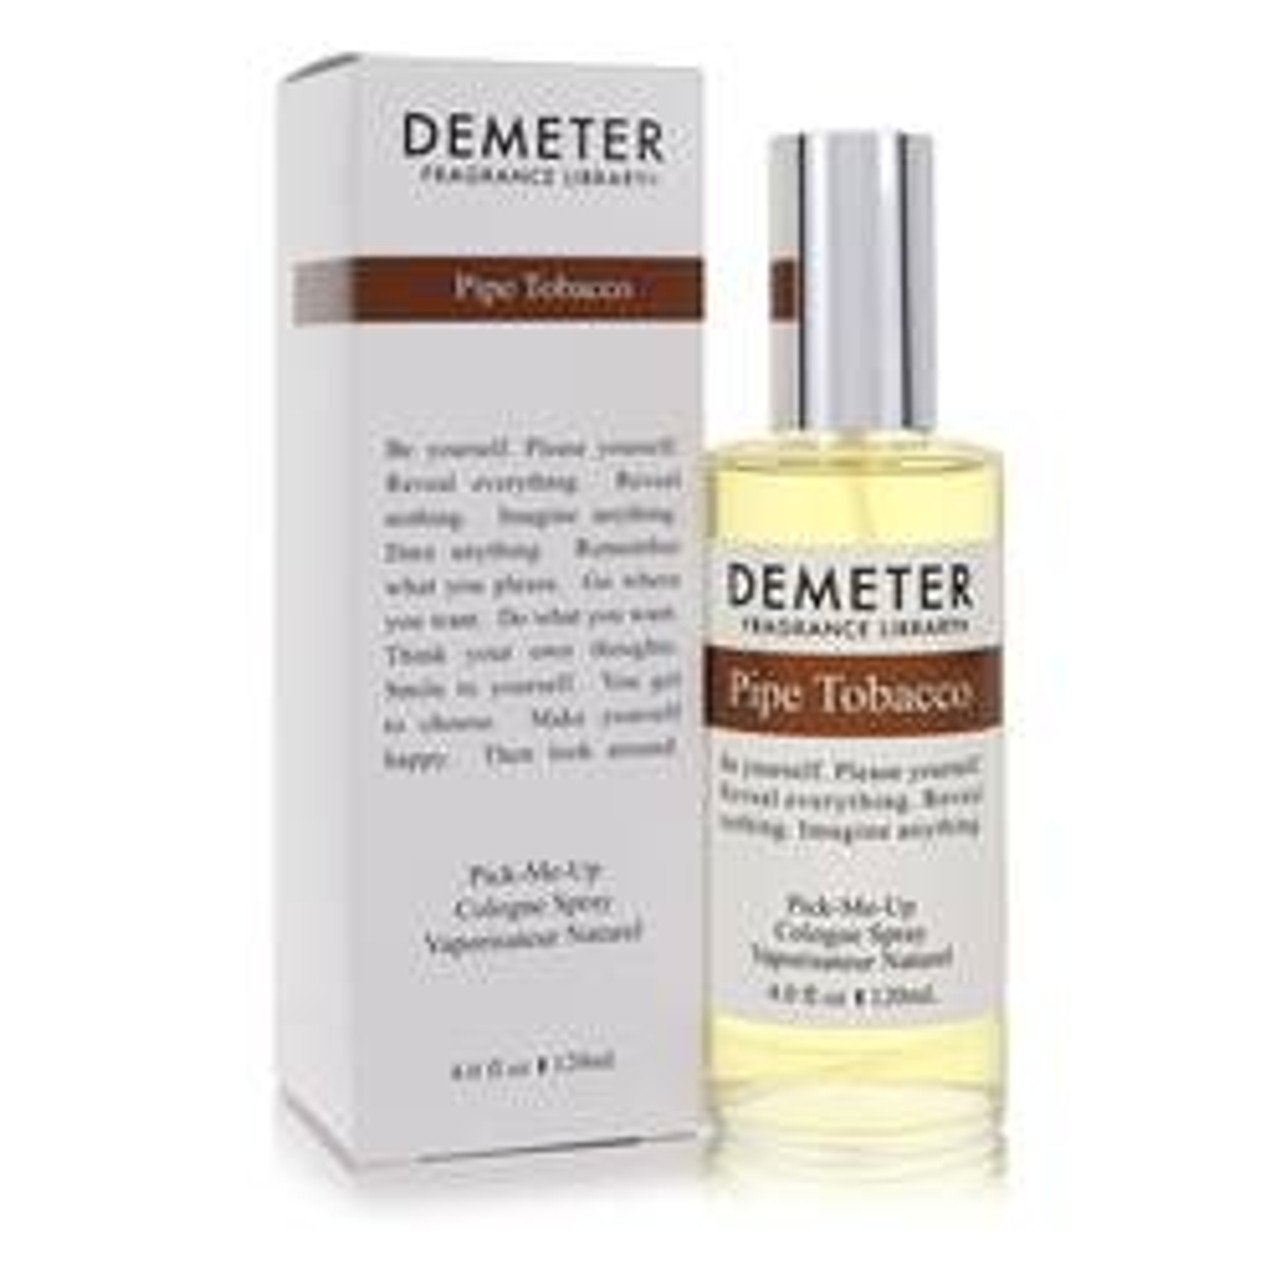 Demeter Pipe Tobacco Perfume By Demeter Cologne Spray 4 oz for Women - [From 79.50 - Choose pk Qty ] - *Ships from Miami